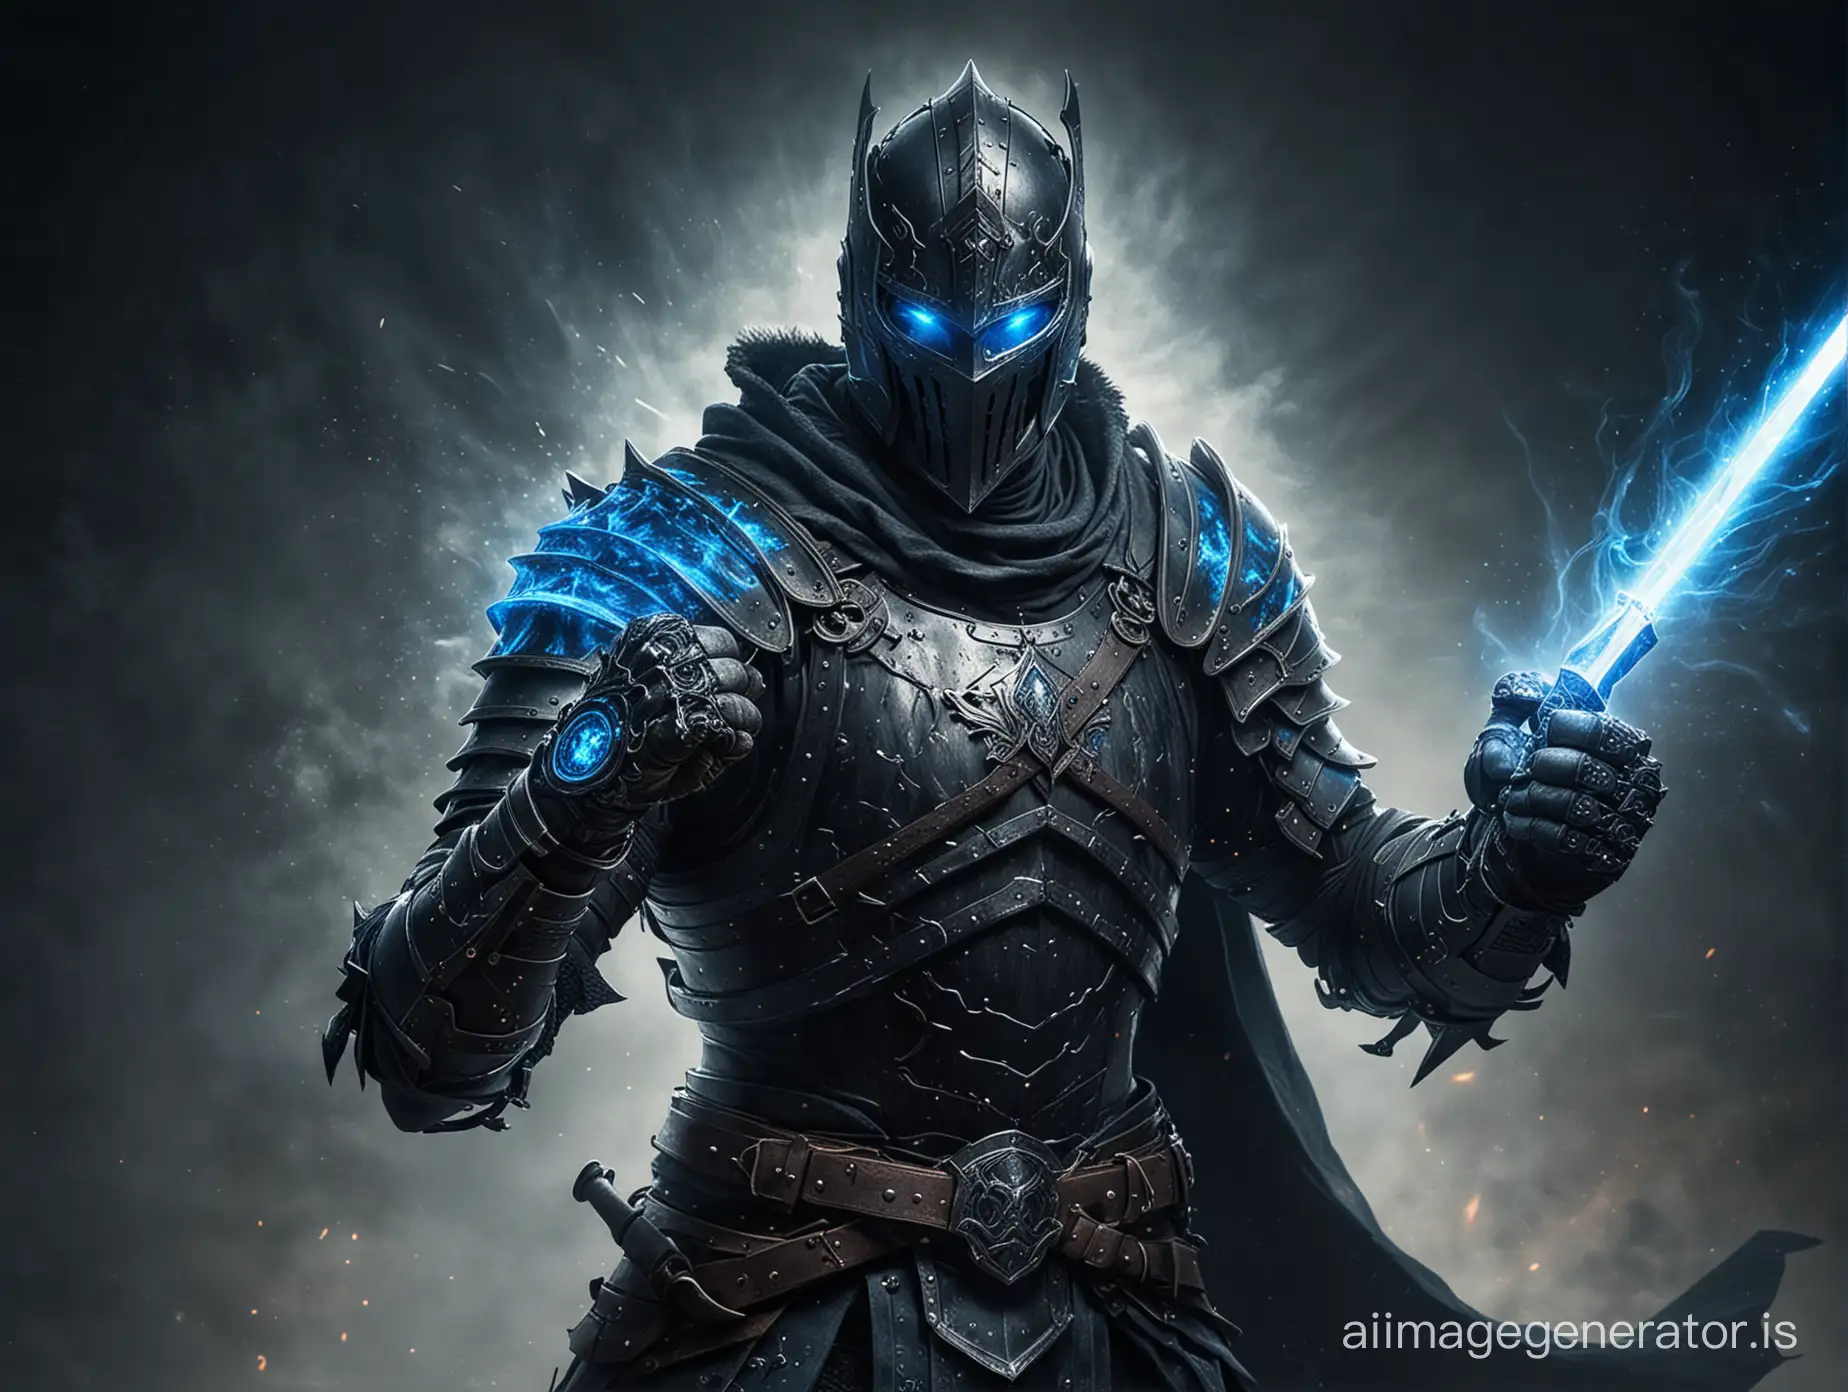 Medieval knight with blue glowing eyes, Black and blue battle worn armor, one hand making a fist with a glowing magic aura around it, the other hand is holding a long sword

No extra body parts, no extra limbs